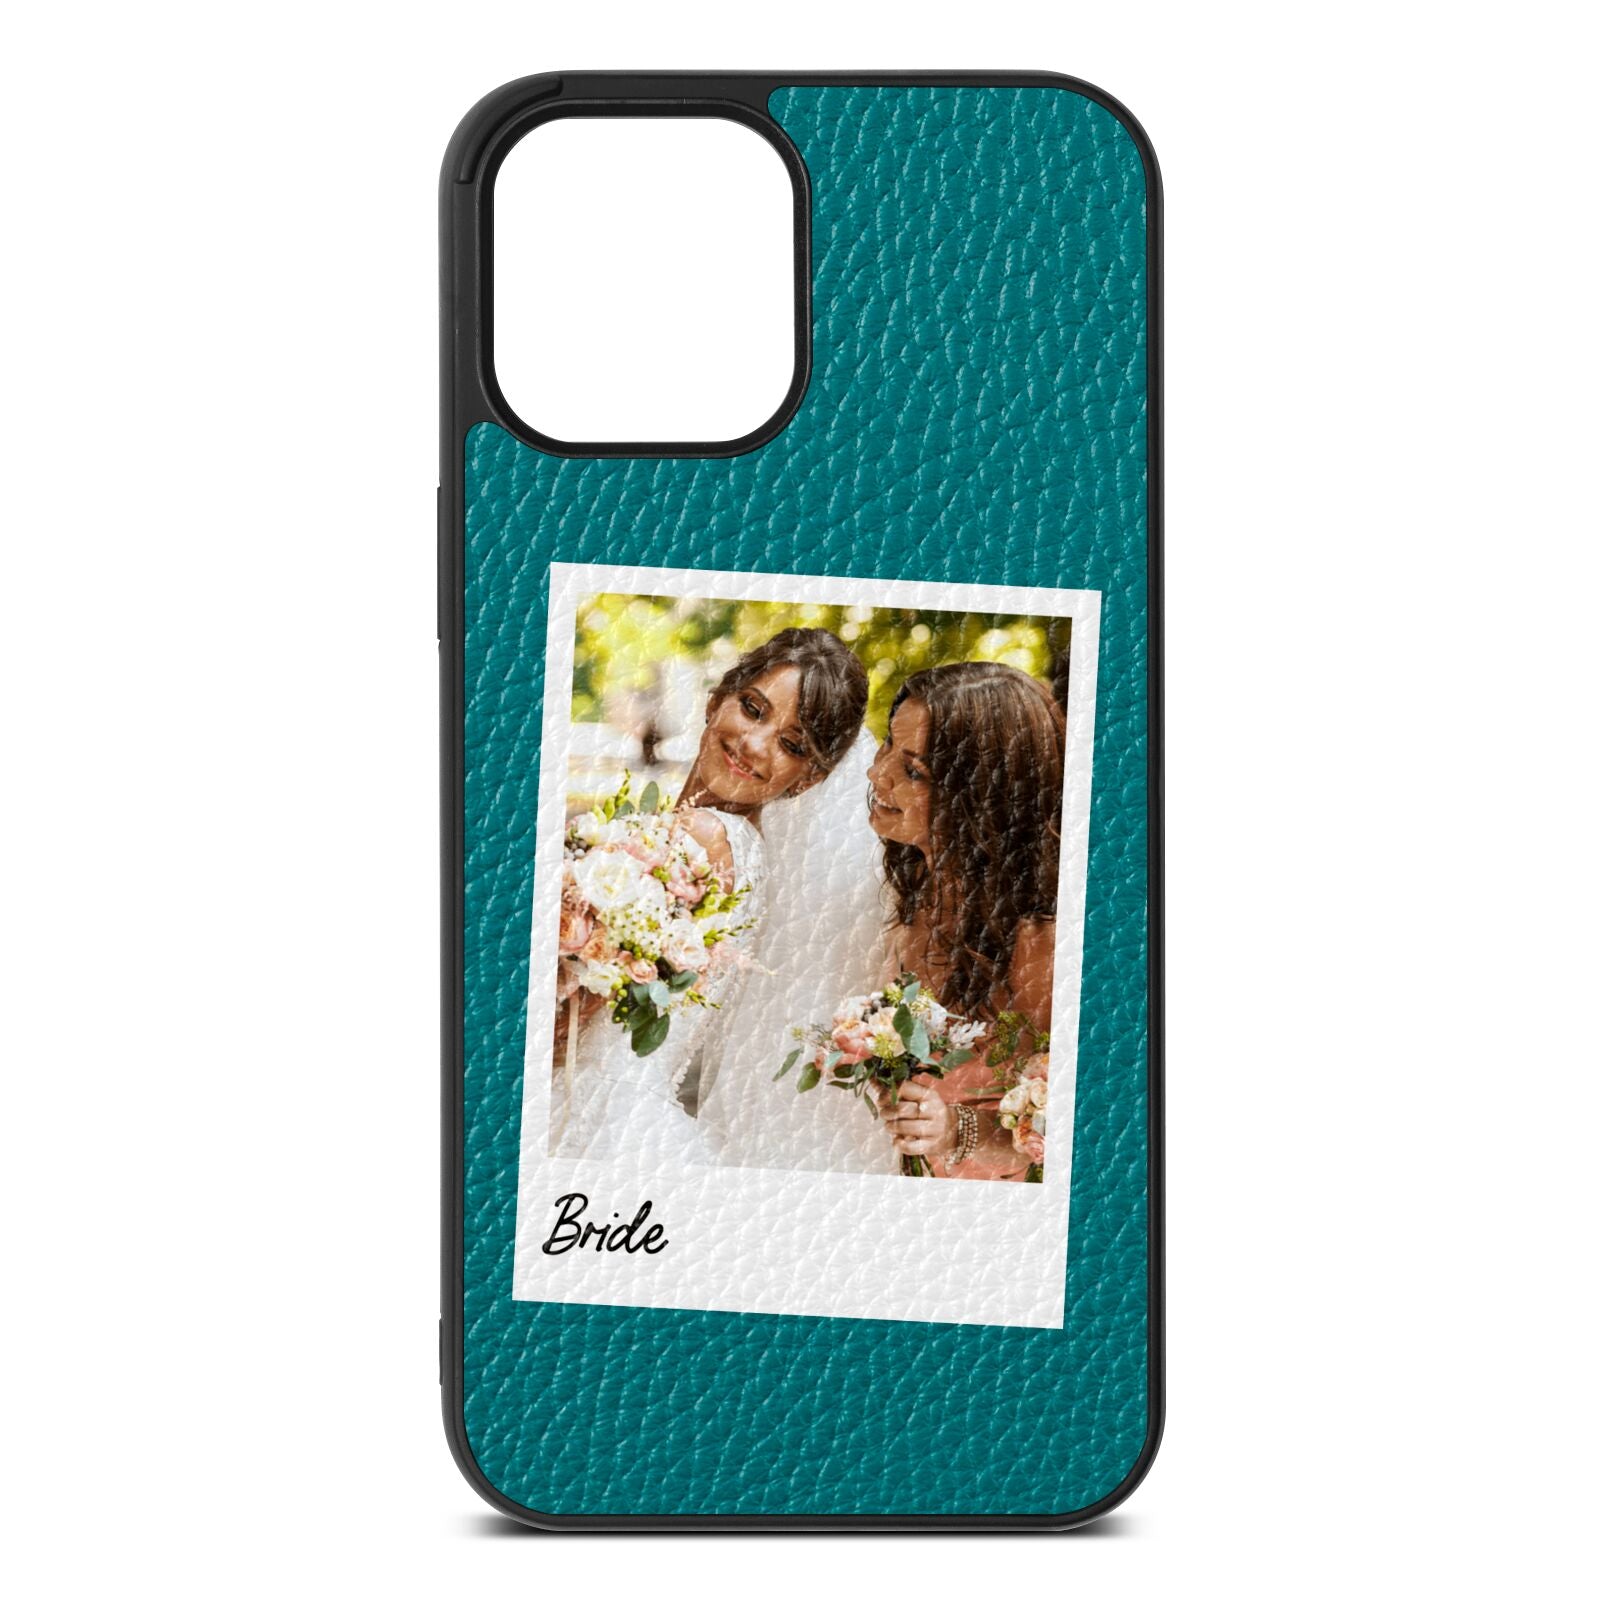 Bridal Photo Green Pebble Leather iPhone 12 Pro Max Case